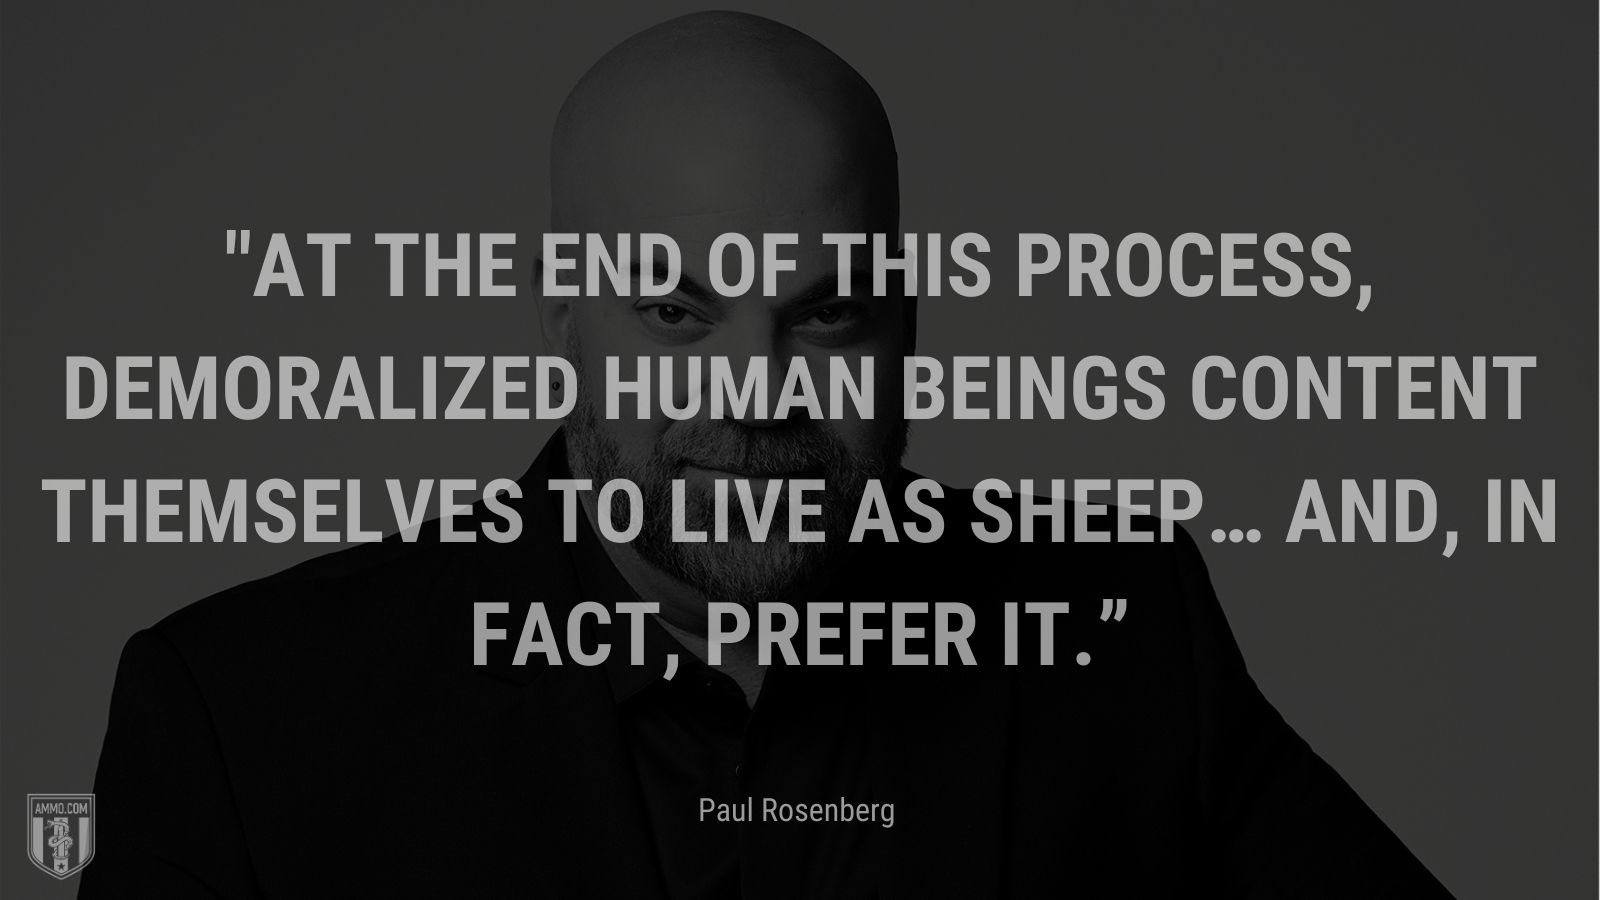 “At the end of this process, demoralized human beings content themselves to live as sheep… and, in fact, prefer it.” - Paul Rosenberg